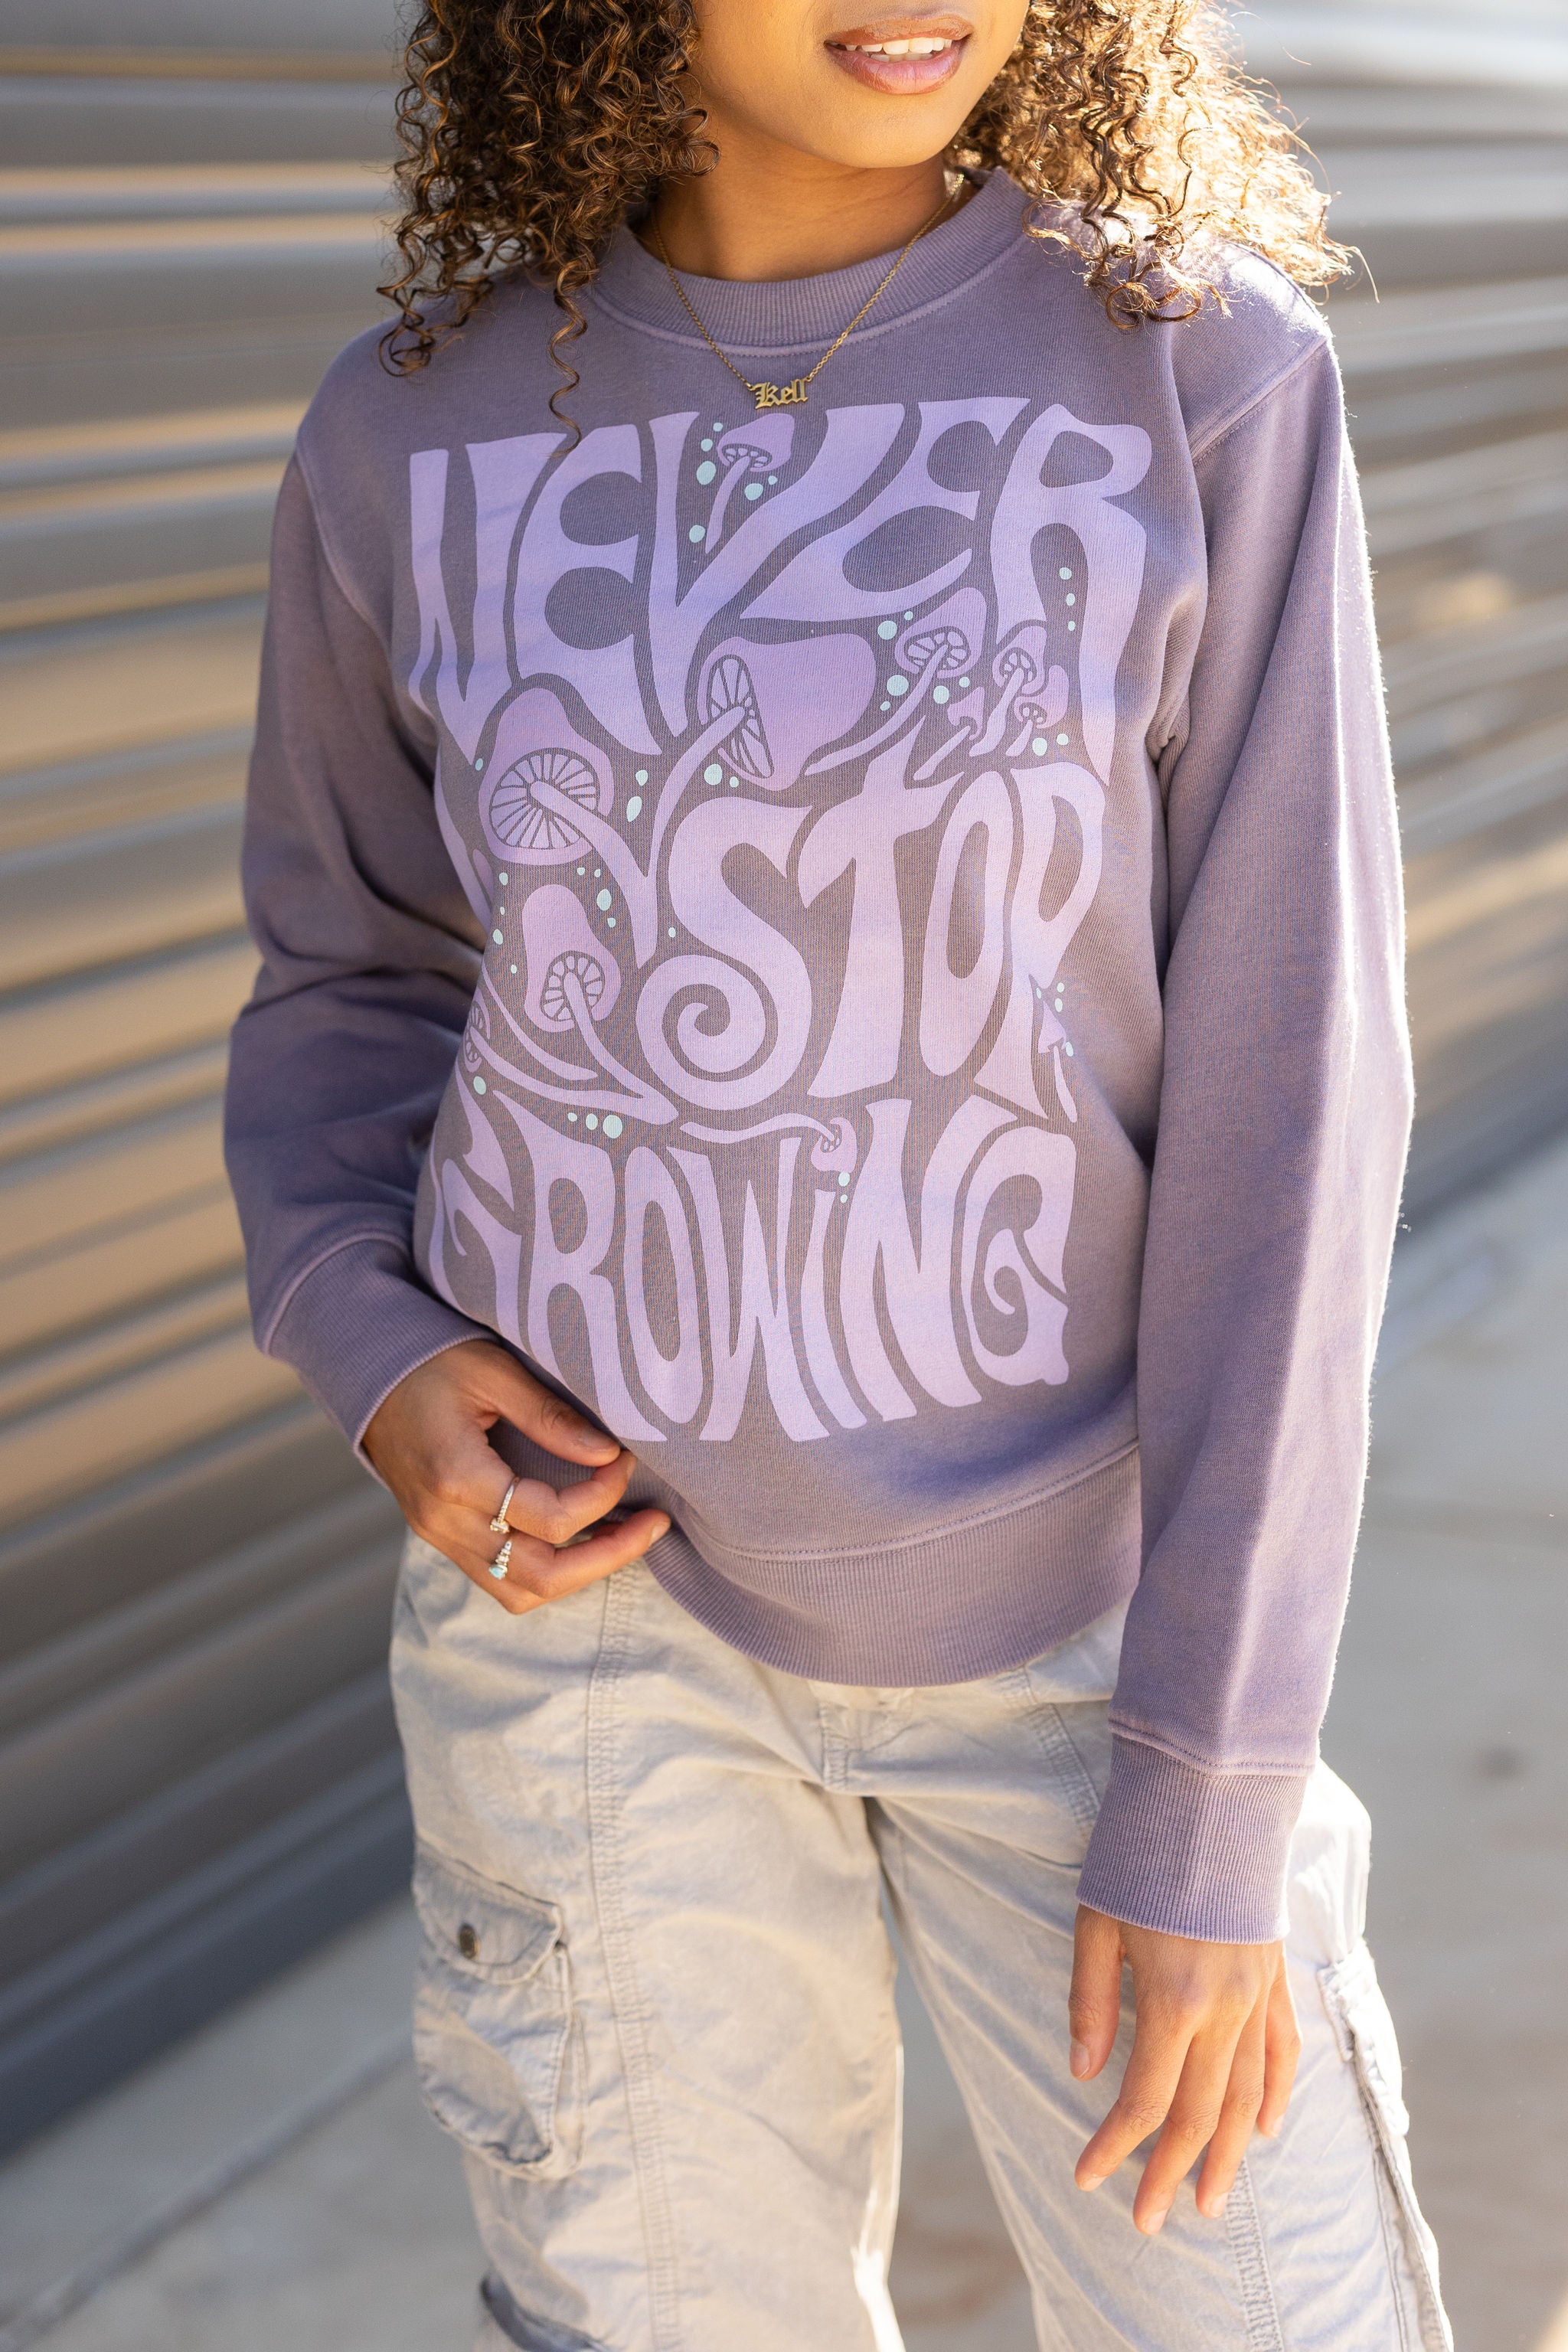 Never Stop Growing Sweater